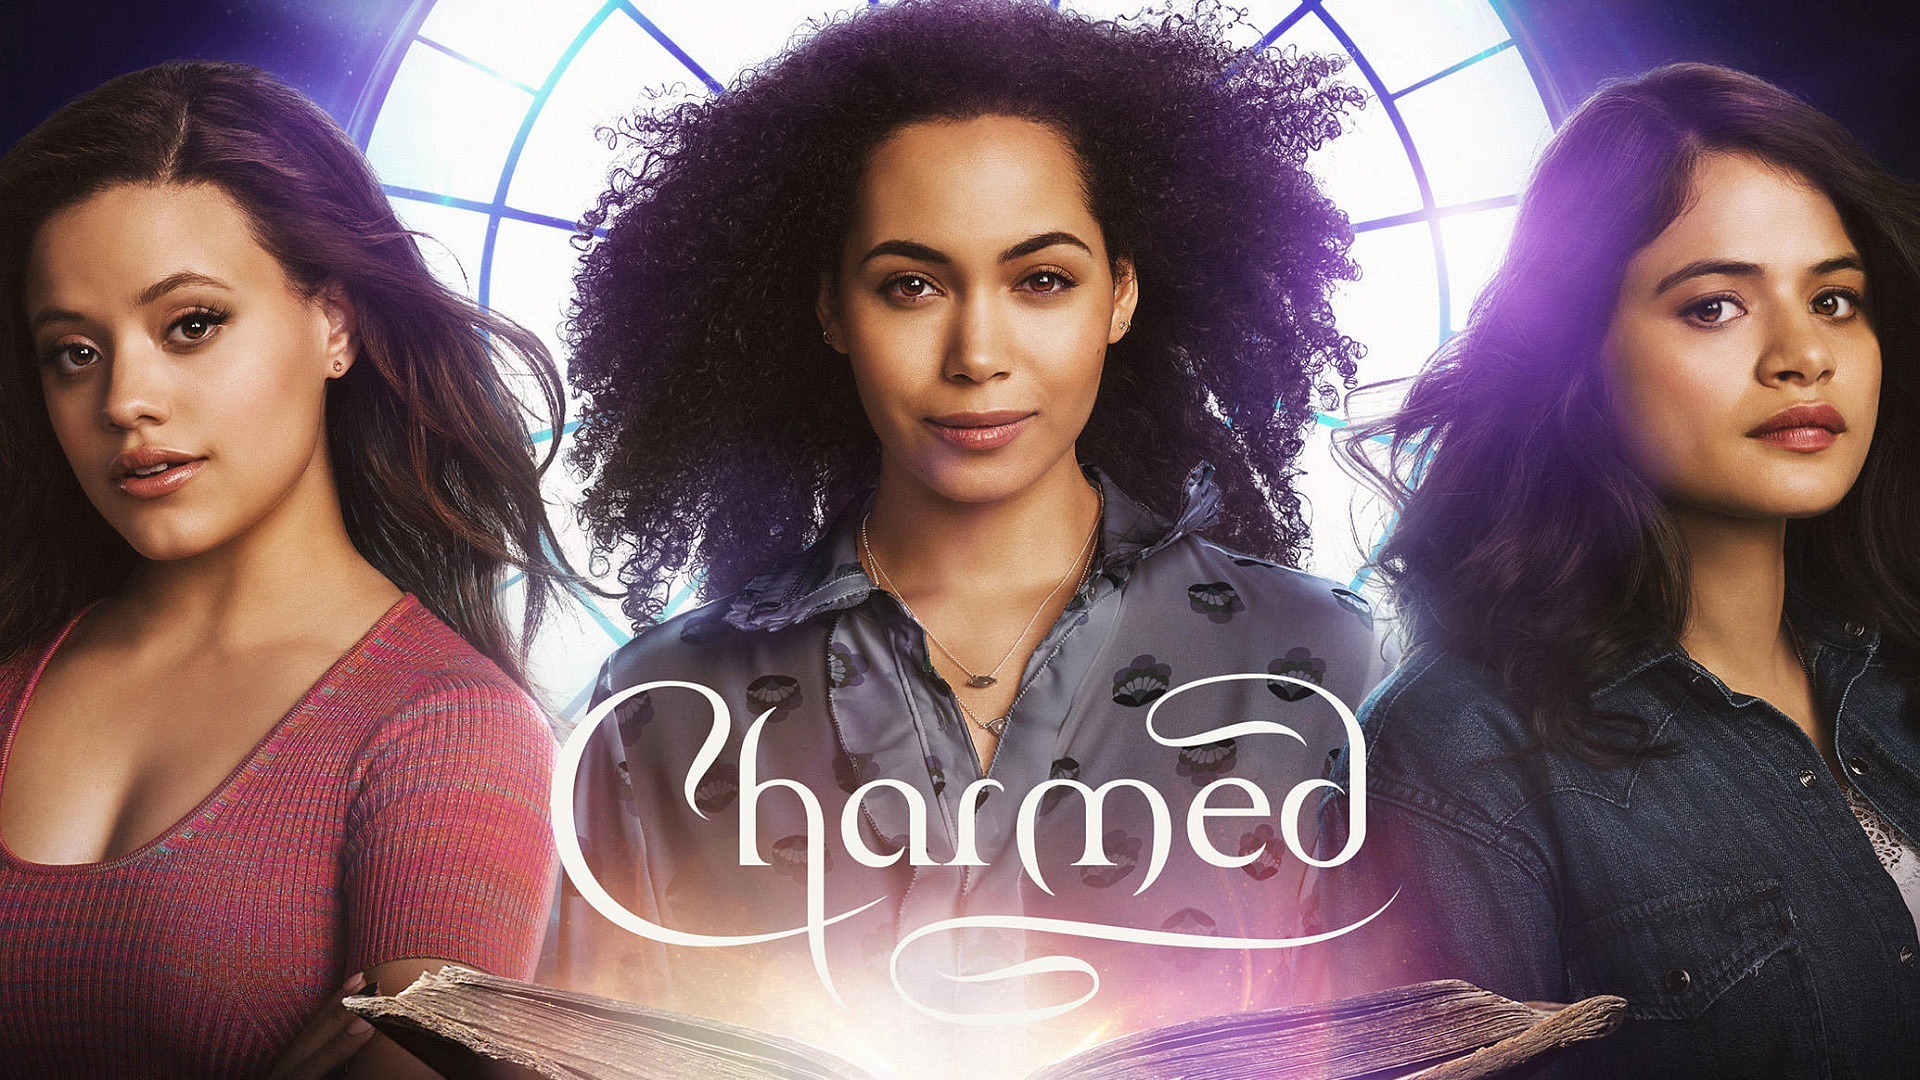 Charmed (TV Series 2018 Now)